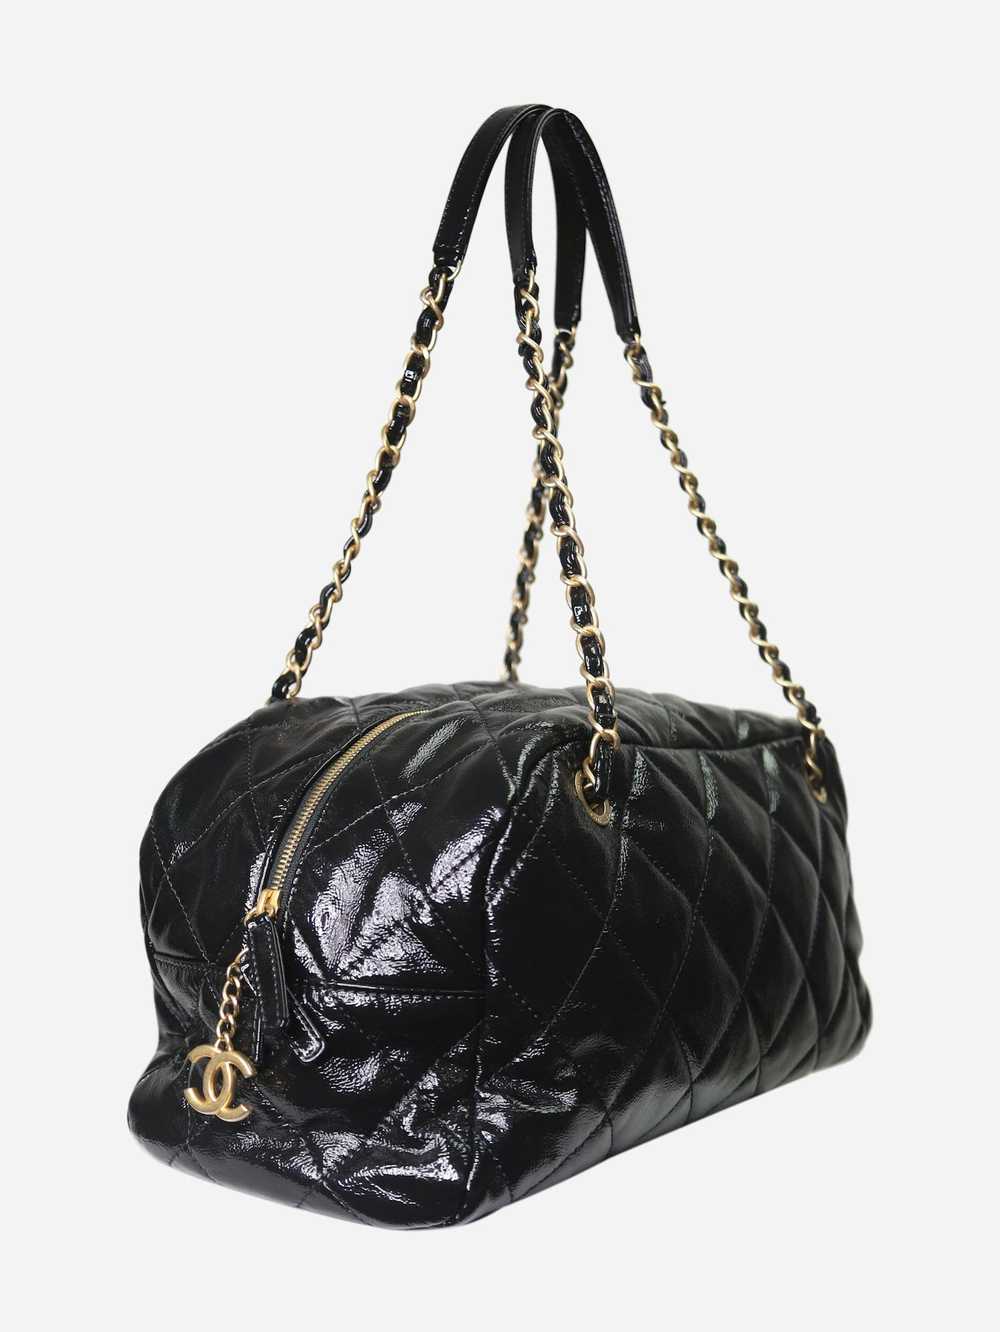 Chanel Black 2020 patent leather bowling bag - image 2